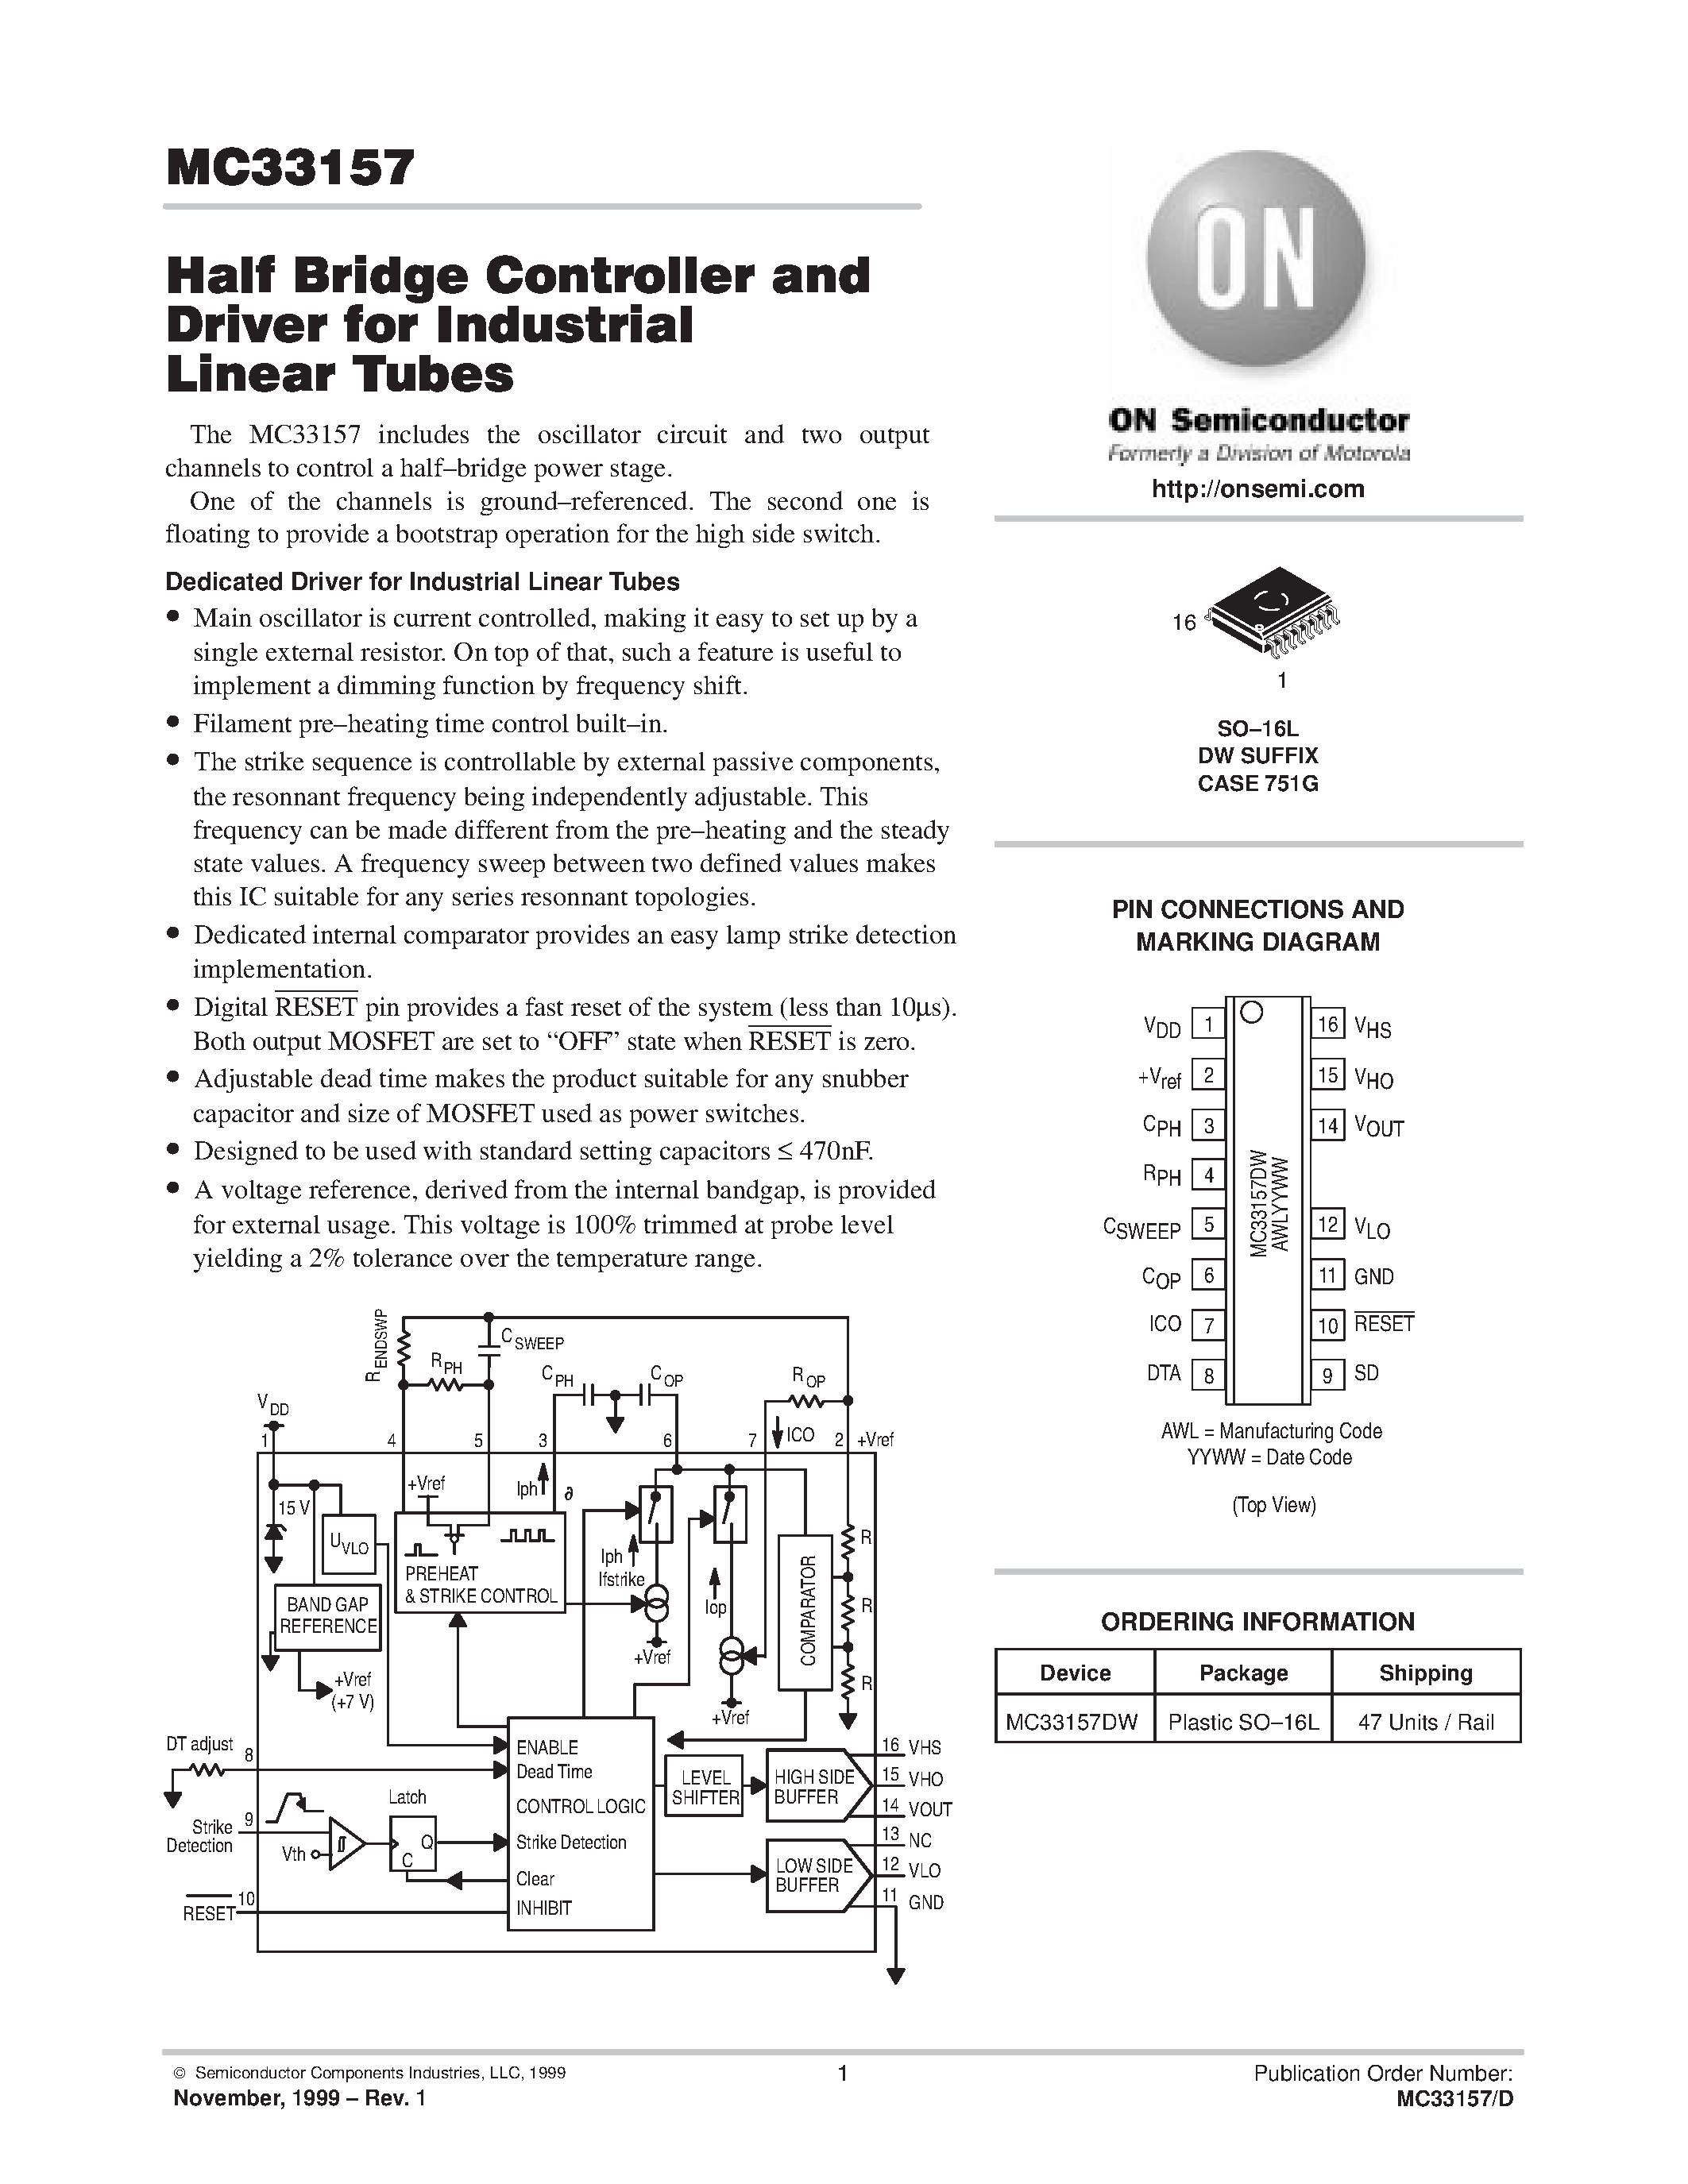 Datasheet MC33157 - Half Bridge Controller and Driver for Industrial Linear Tubes page 1